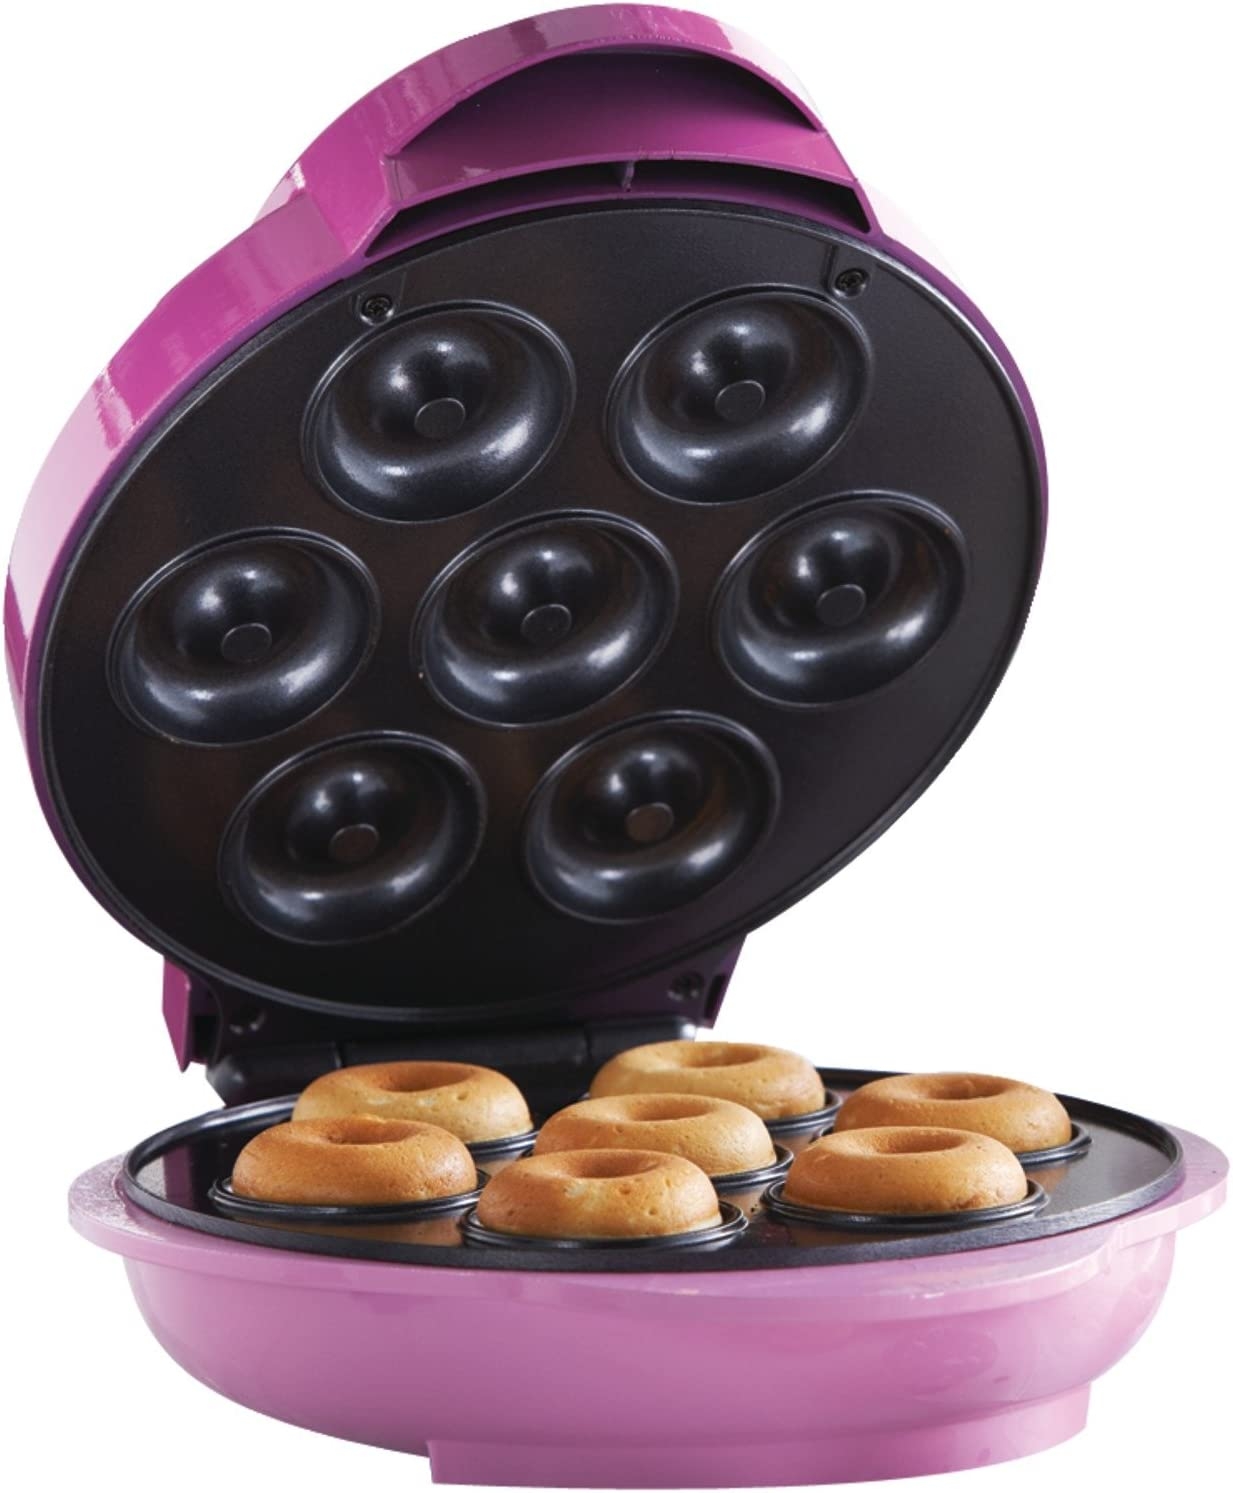 Brentwood Mini Donut Maker Machine, Non-Stick, Pink Import To Shop ×Product customization General Description Gallery Reviews